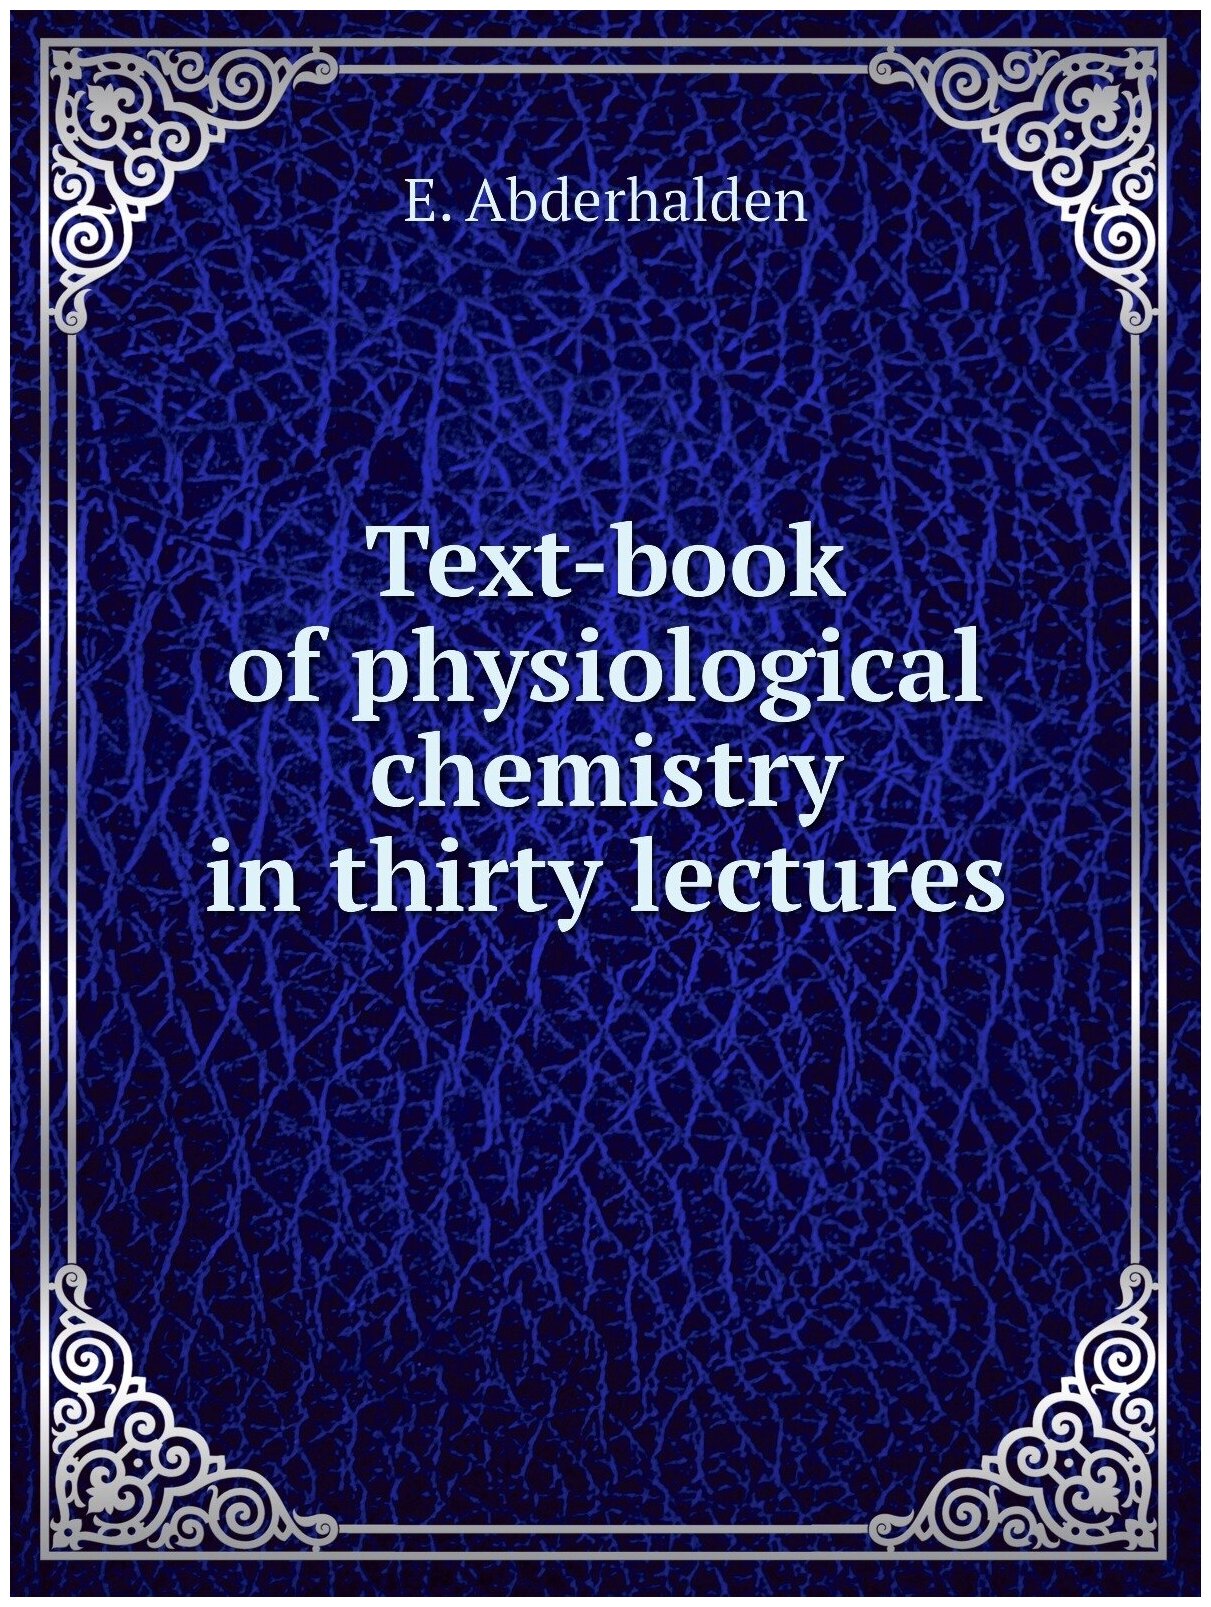 Text-book of physiological chemistry in thirty lectures